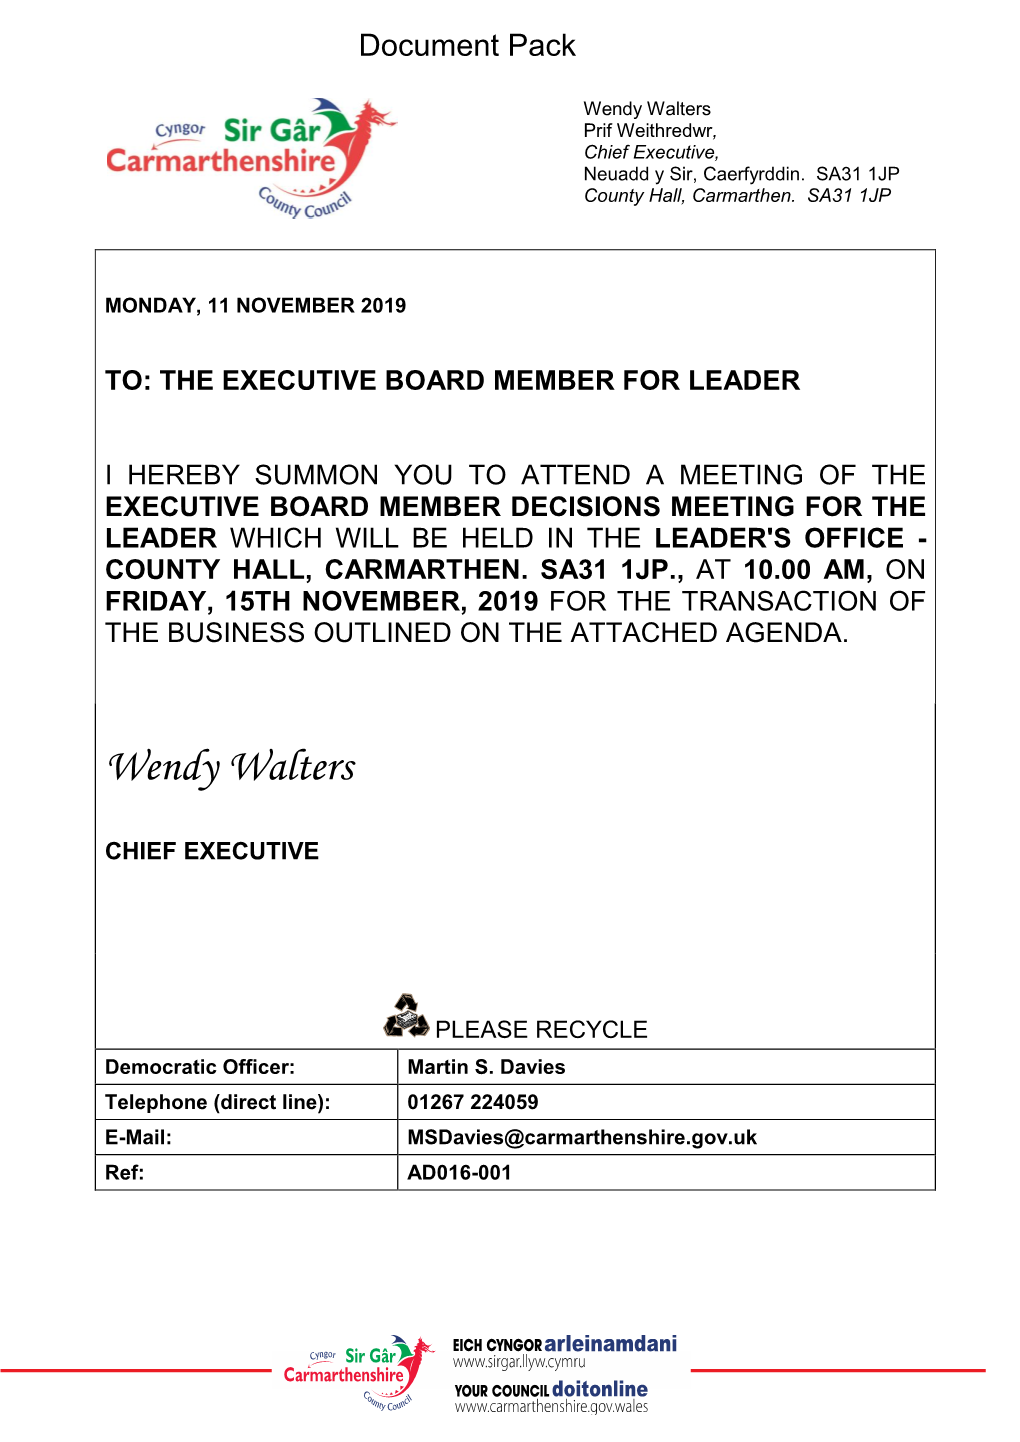 (Public Pack)Agenda Document for Executive Board Member Decisions Meeting for the Leader, 15/11/2019 10:00